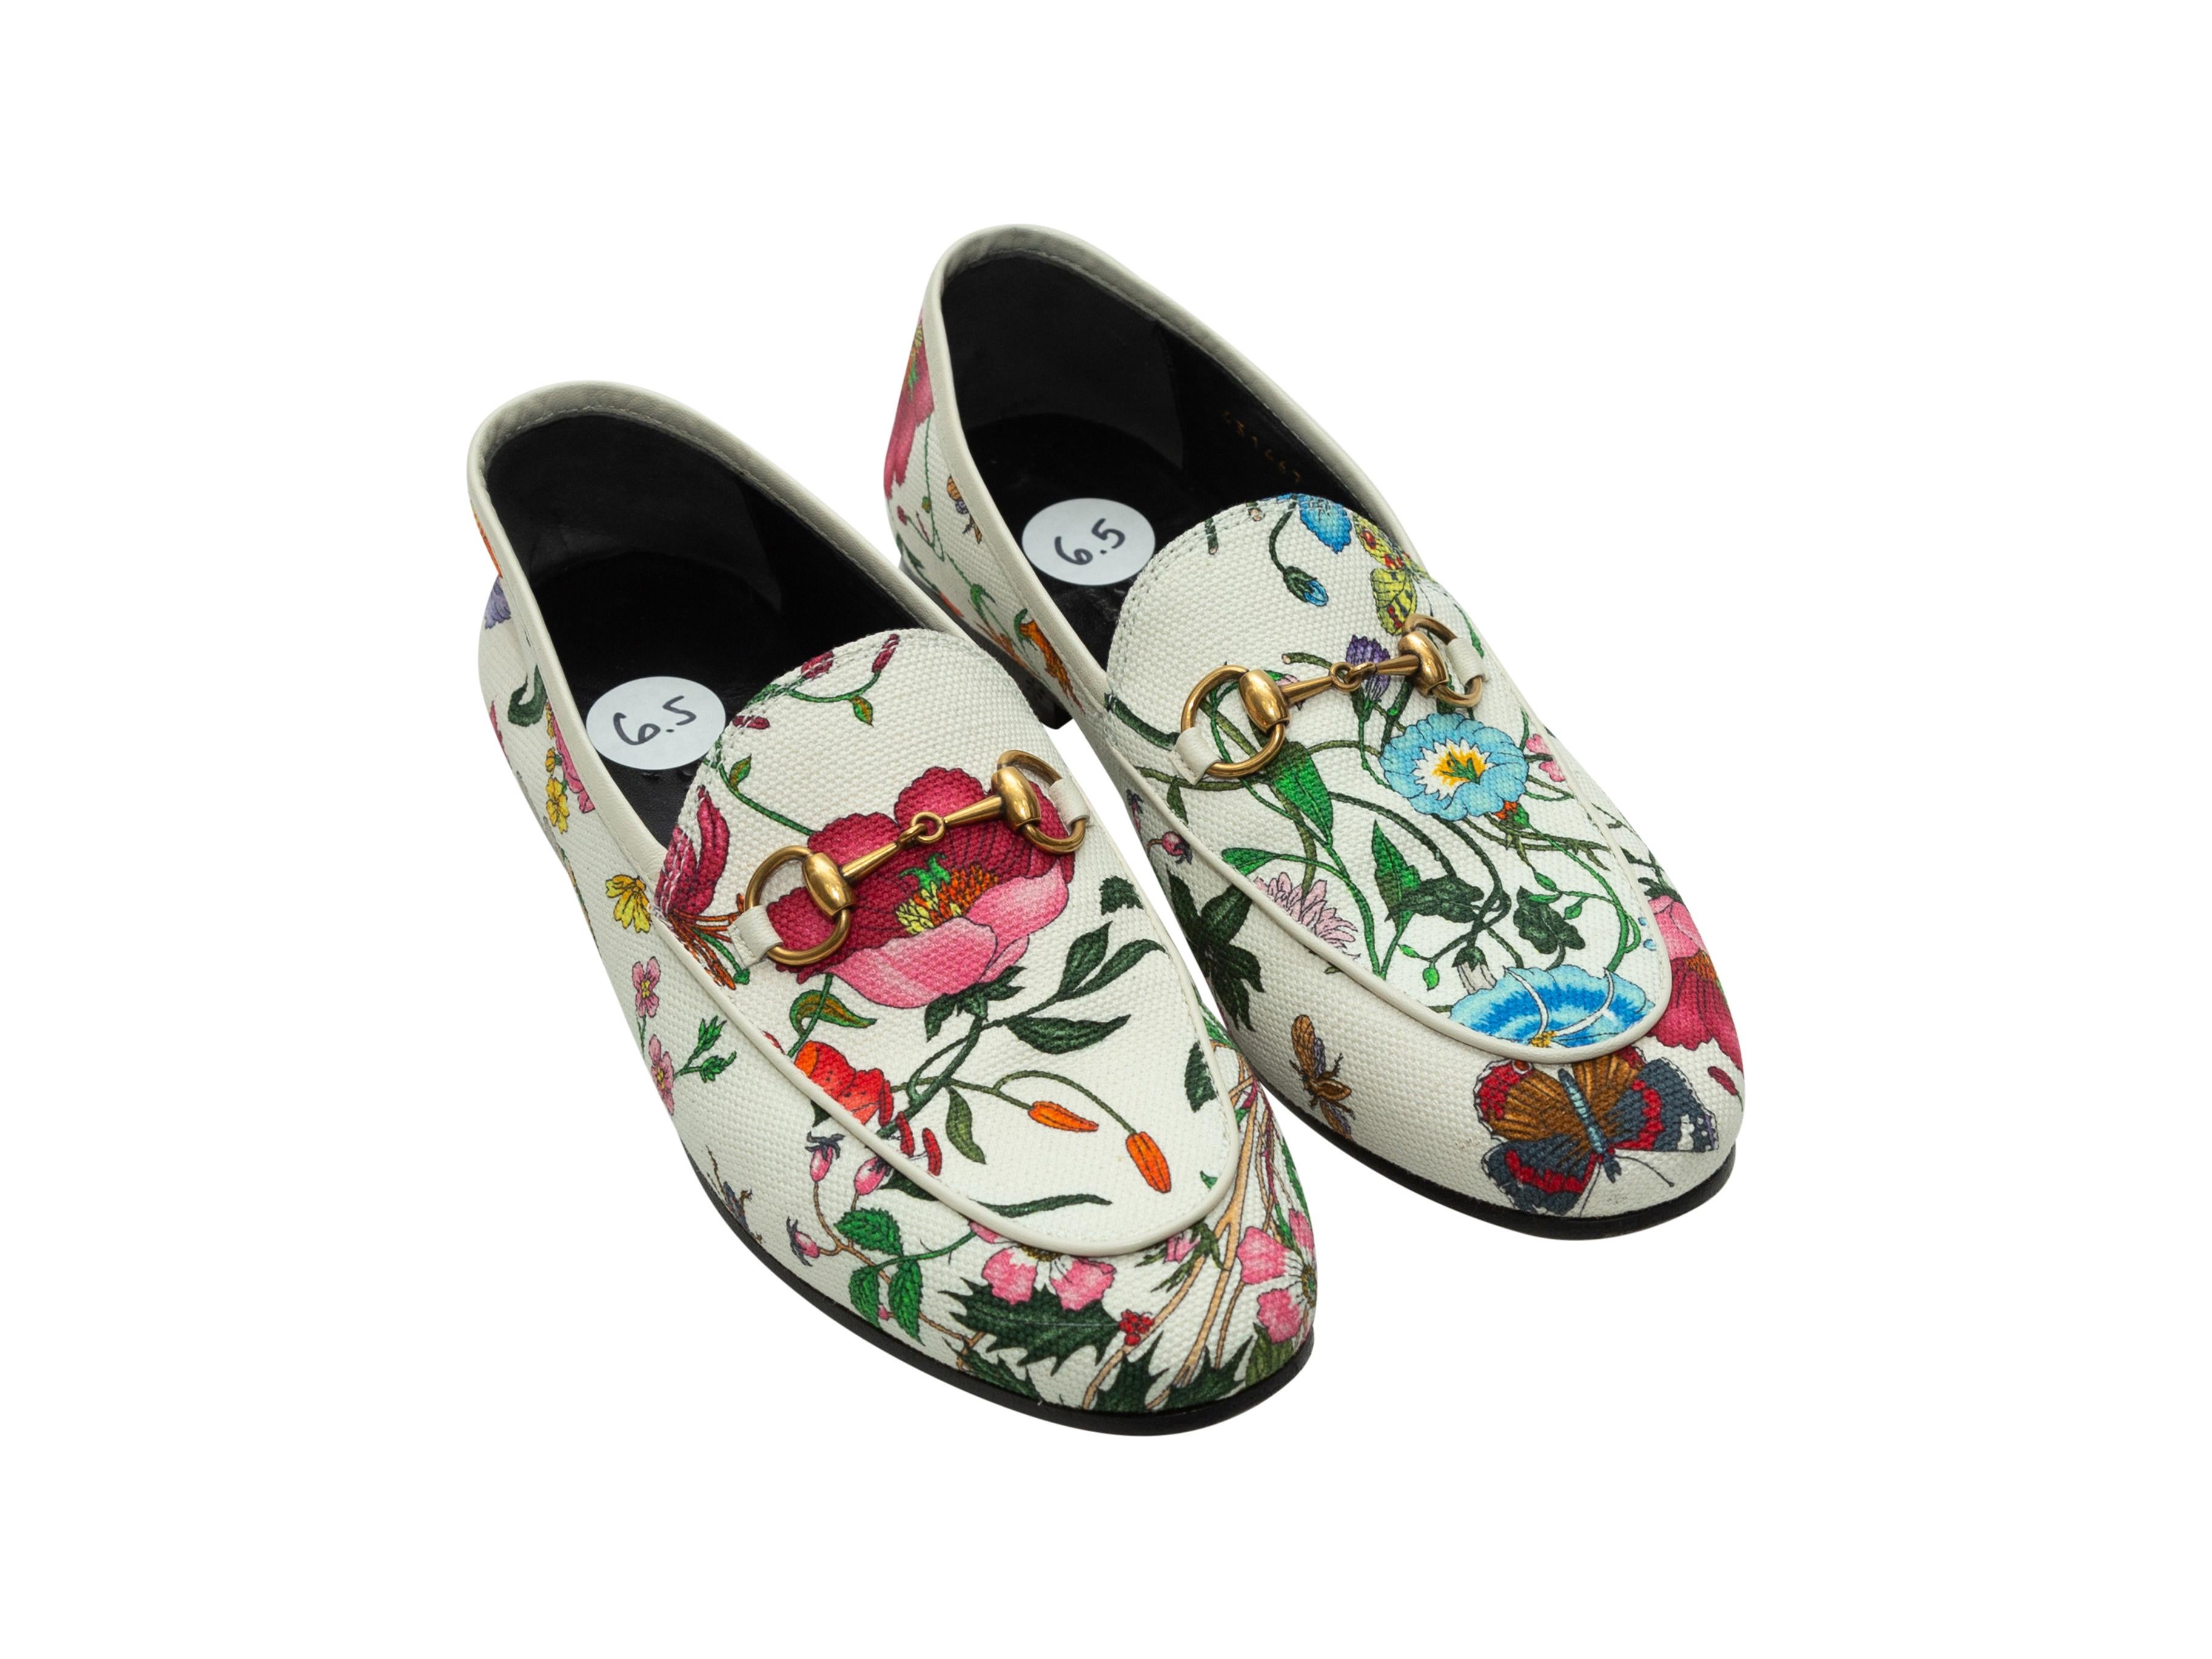 Product details: White and multicolor round-toe canvas loafers by Gucci. Multicolor Flora print throughout. Leather trim. Gold-tone horsebit accents at tops. Designer size 36.5. 0.5